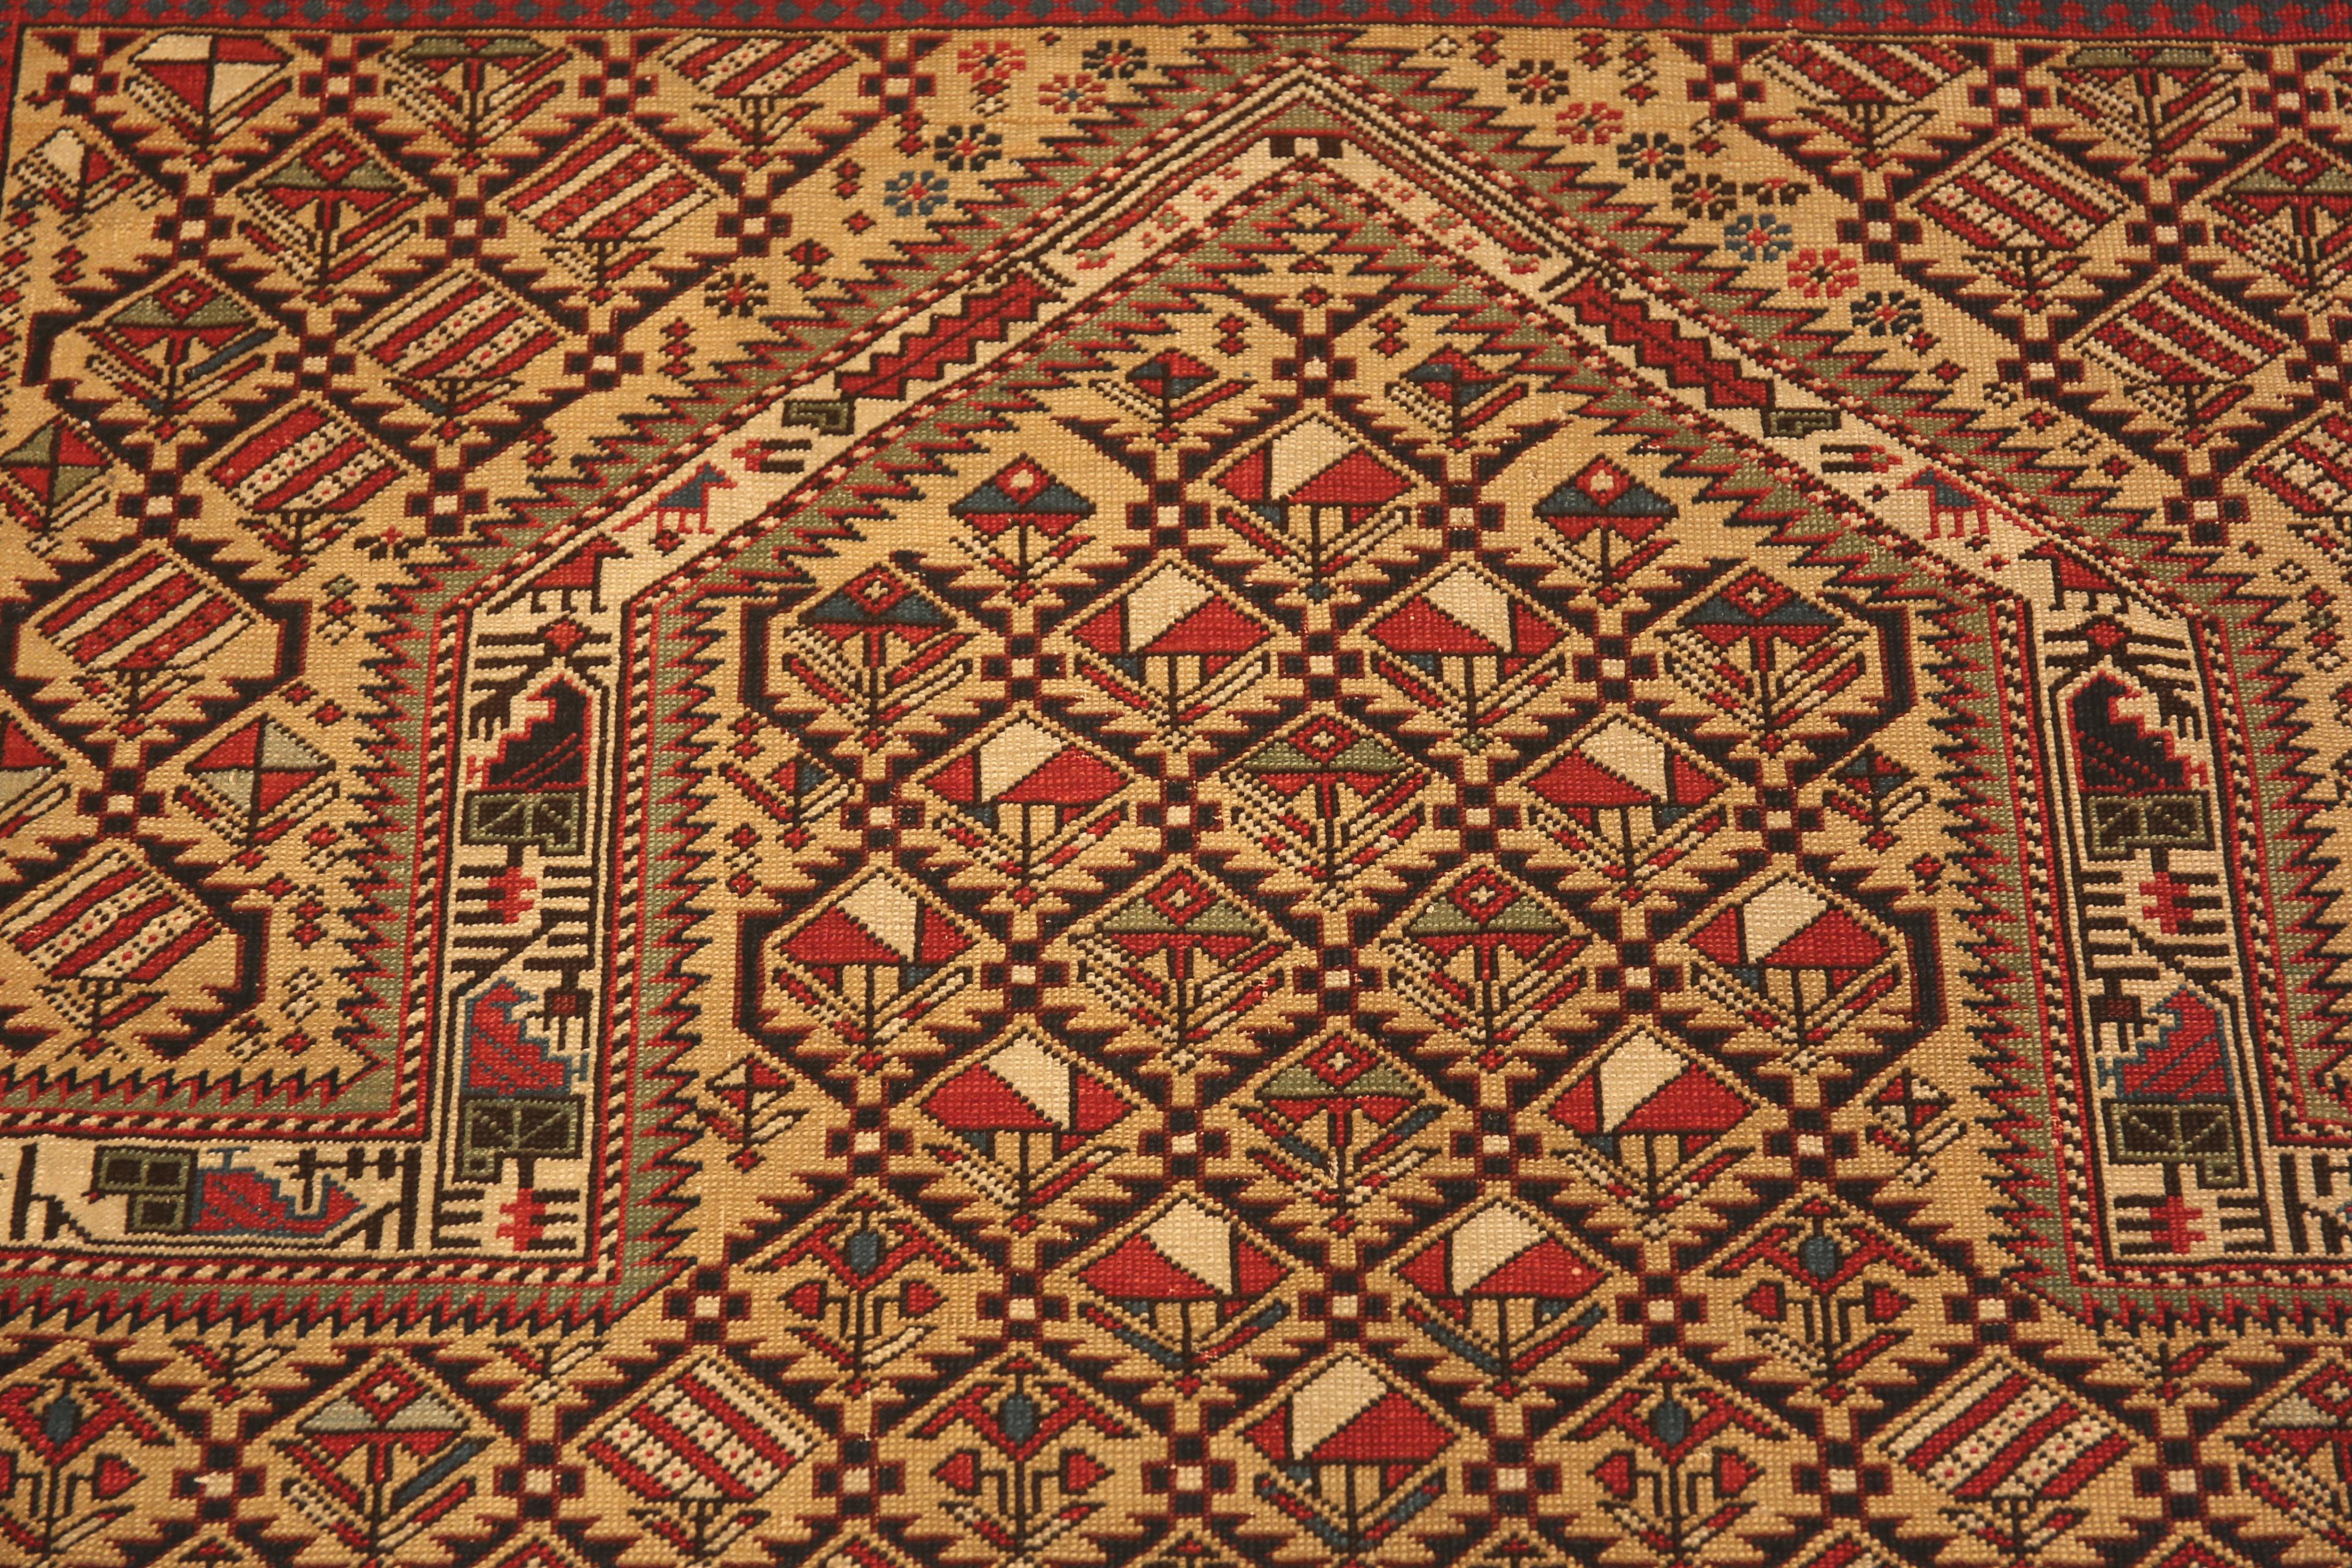 4 by 5 rug size